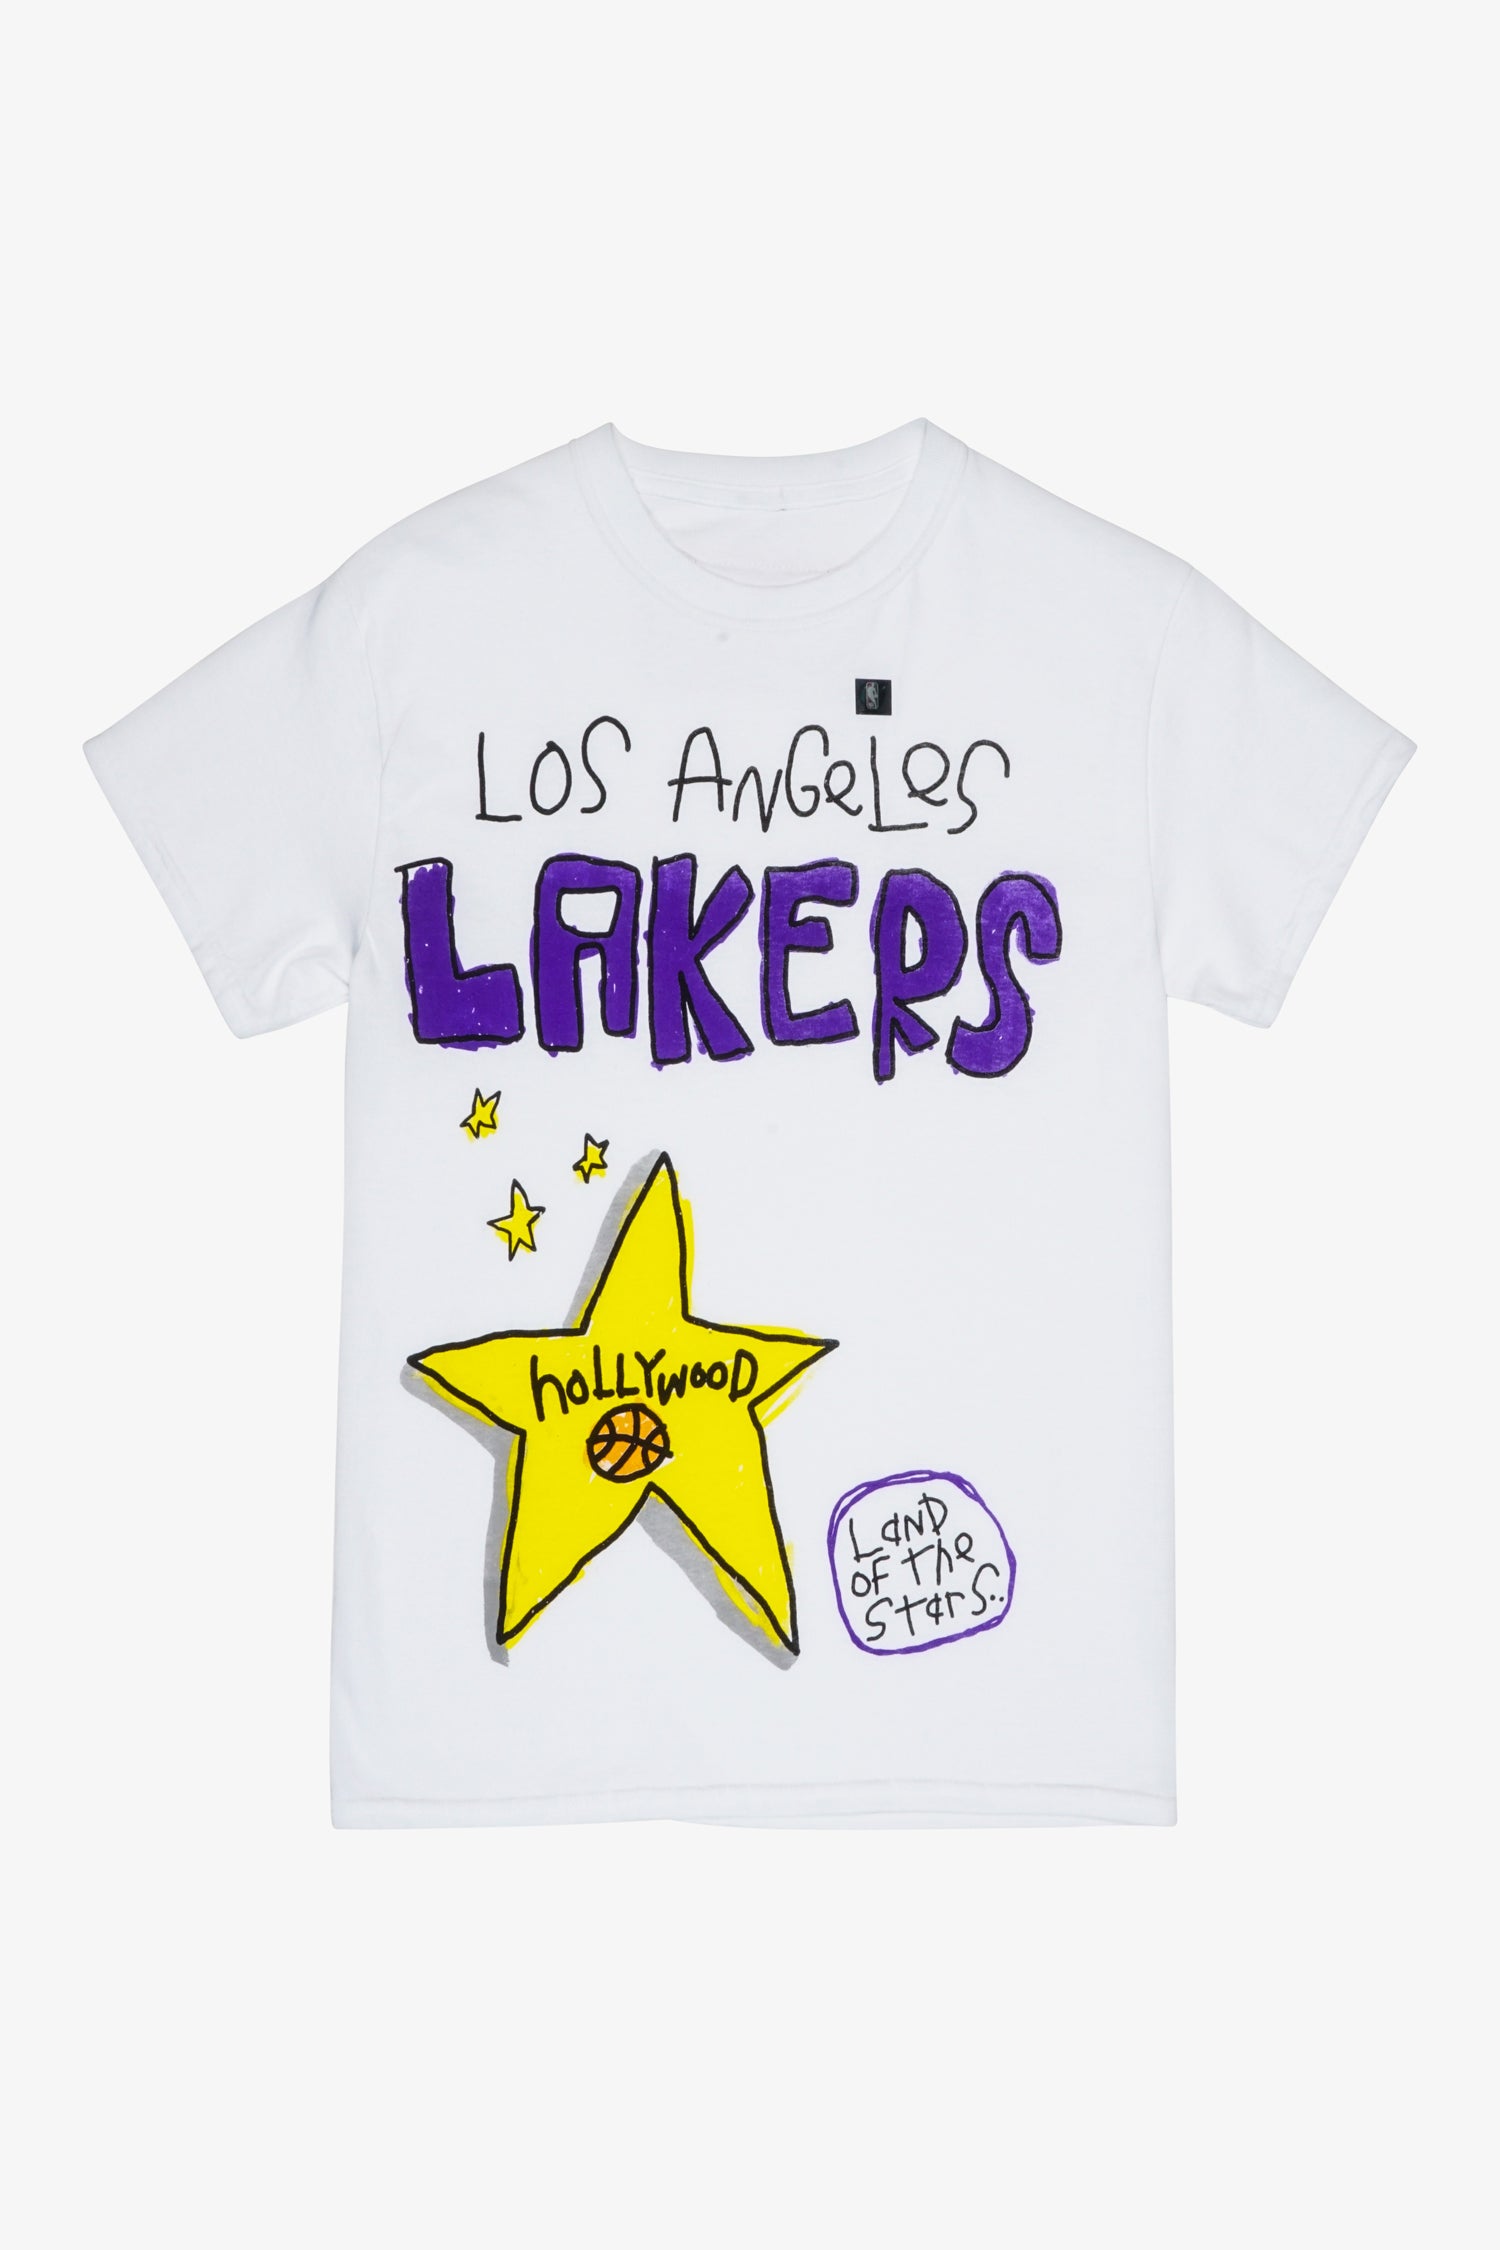 Selectshop FRAME - AFTER SCHOOL SPECIAL Los Angeles Lakers Tee T-Shirts Dubai